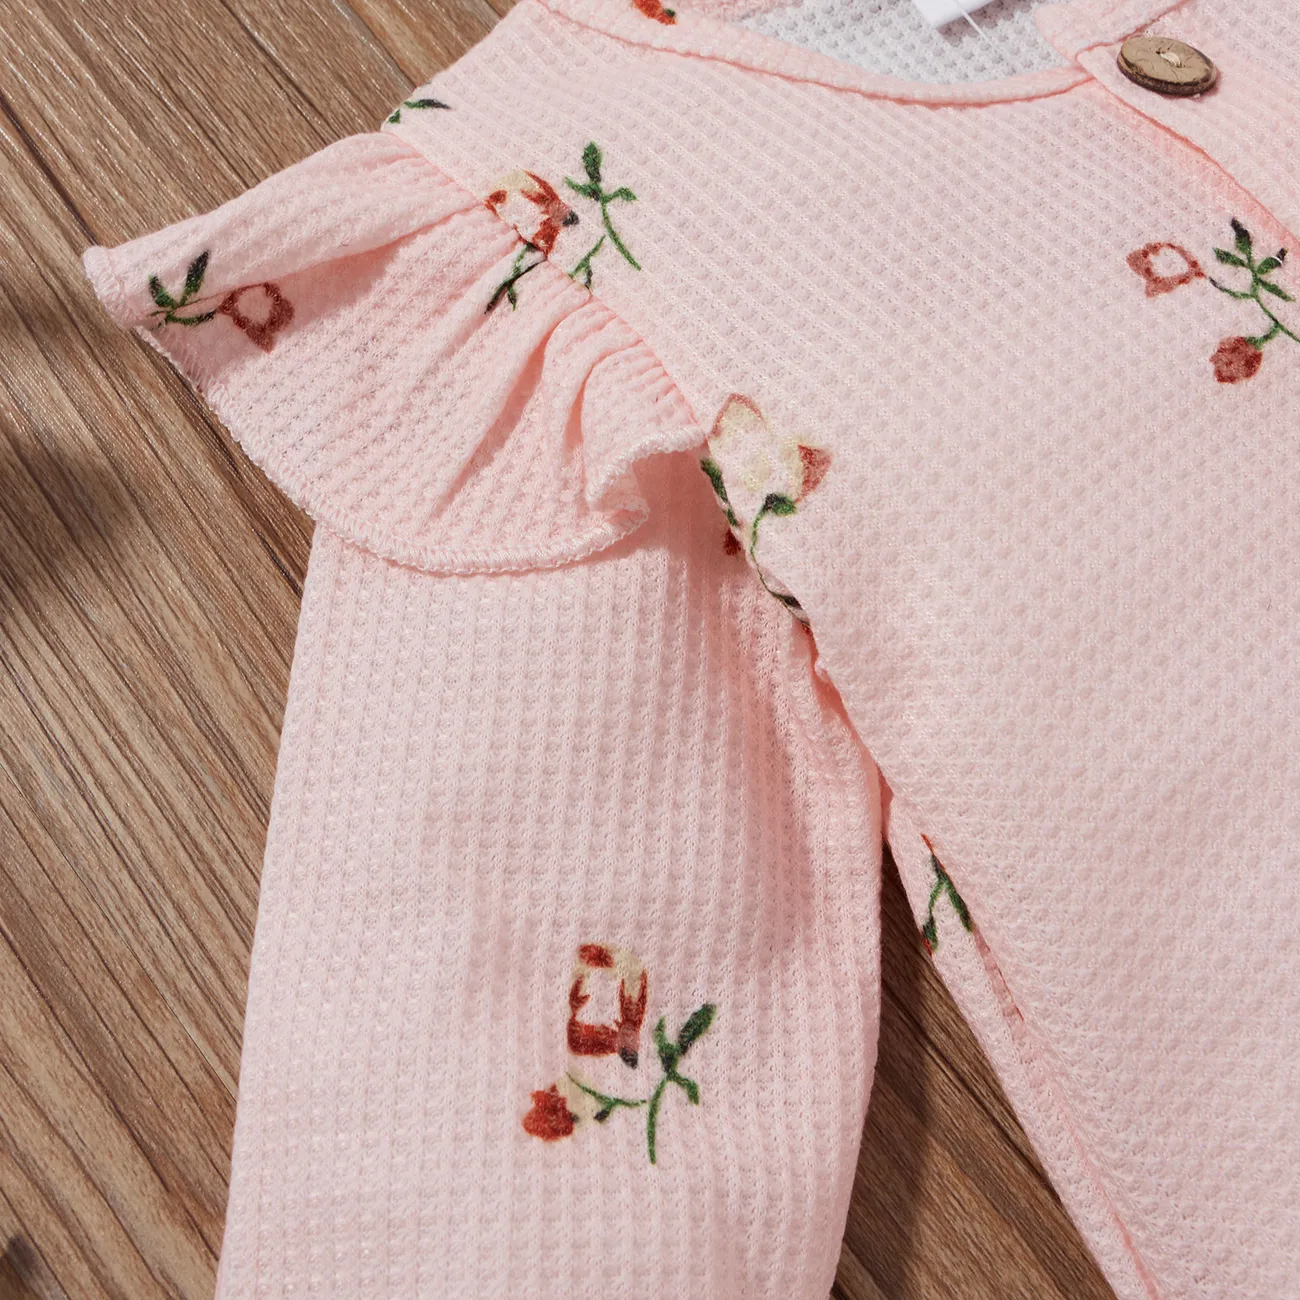 2pcs Baby Girl 95% Cotton Long-sleeve Floral Print Ruffle Button Up Waffle Jumpsuit with Headband Set Pink big image 1